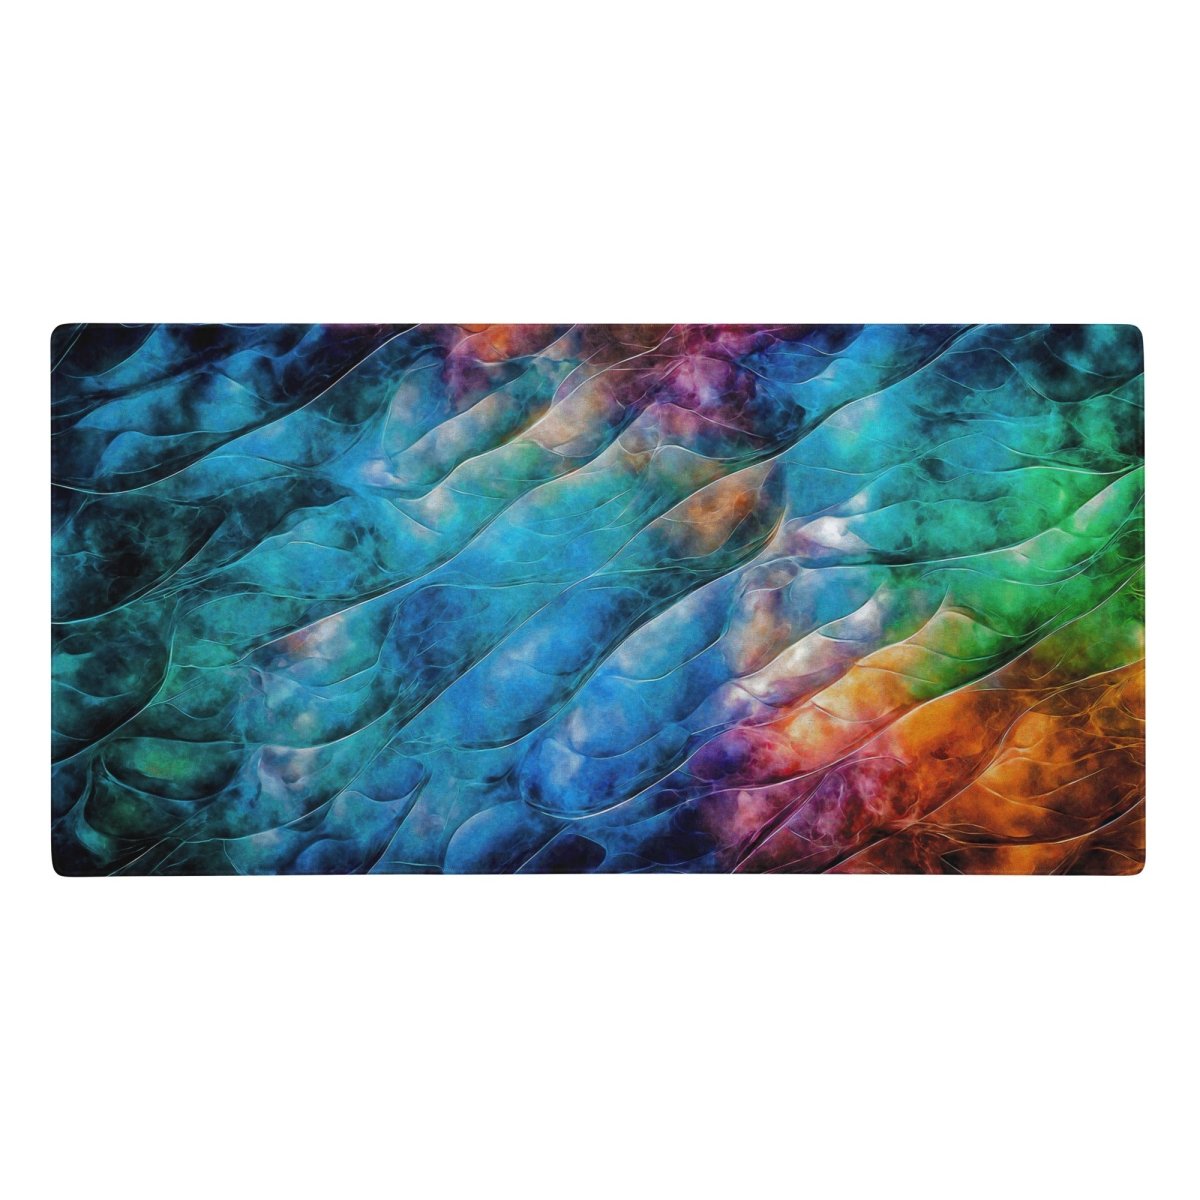 Hue waves mix - Gaming mouse pad - Ever colorful